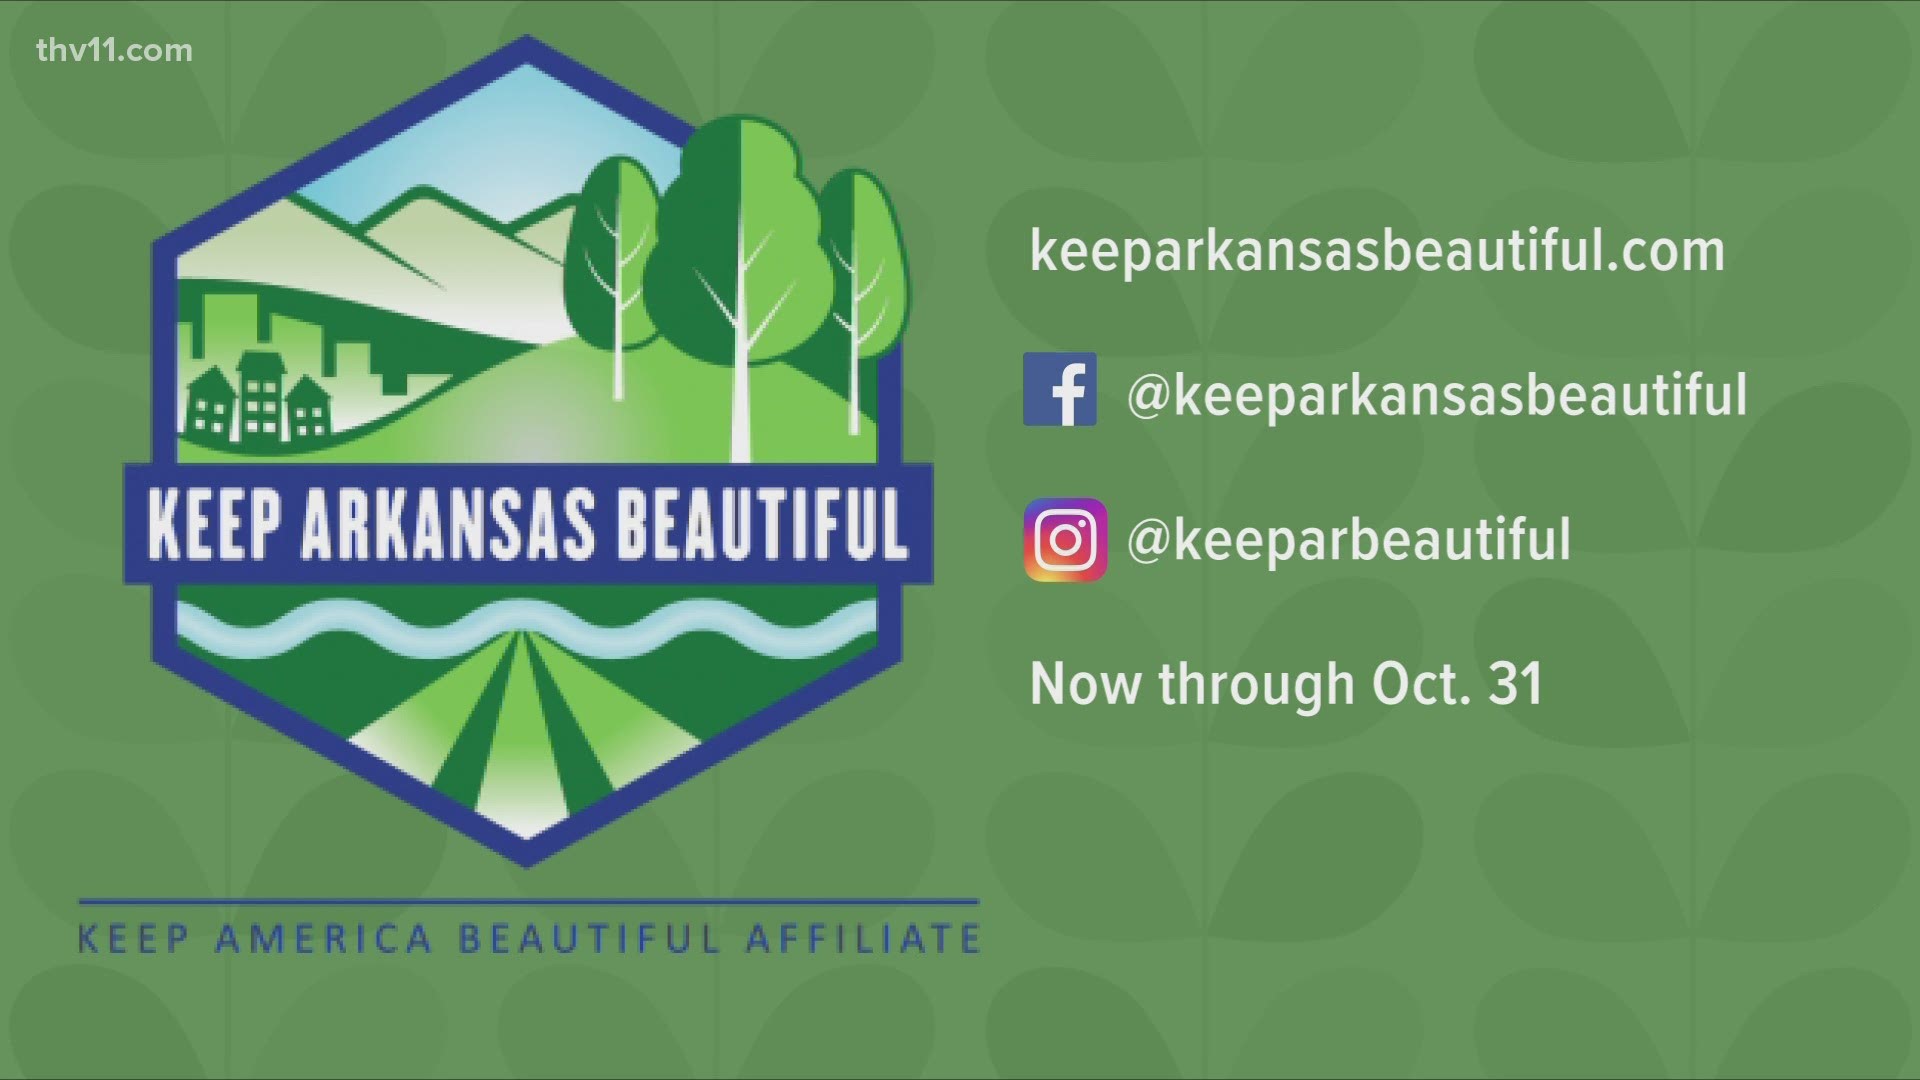 Get outdoors and explore Arkansas while helping cleanup the thousands of pounds of litter left behind.